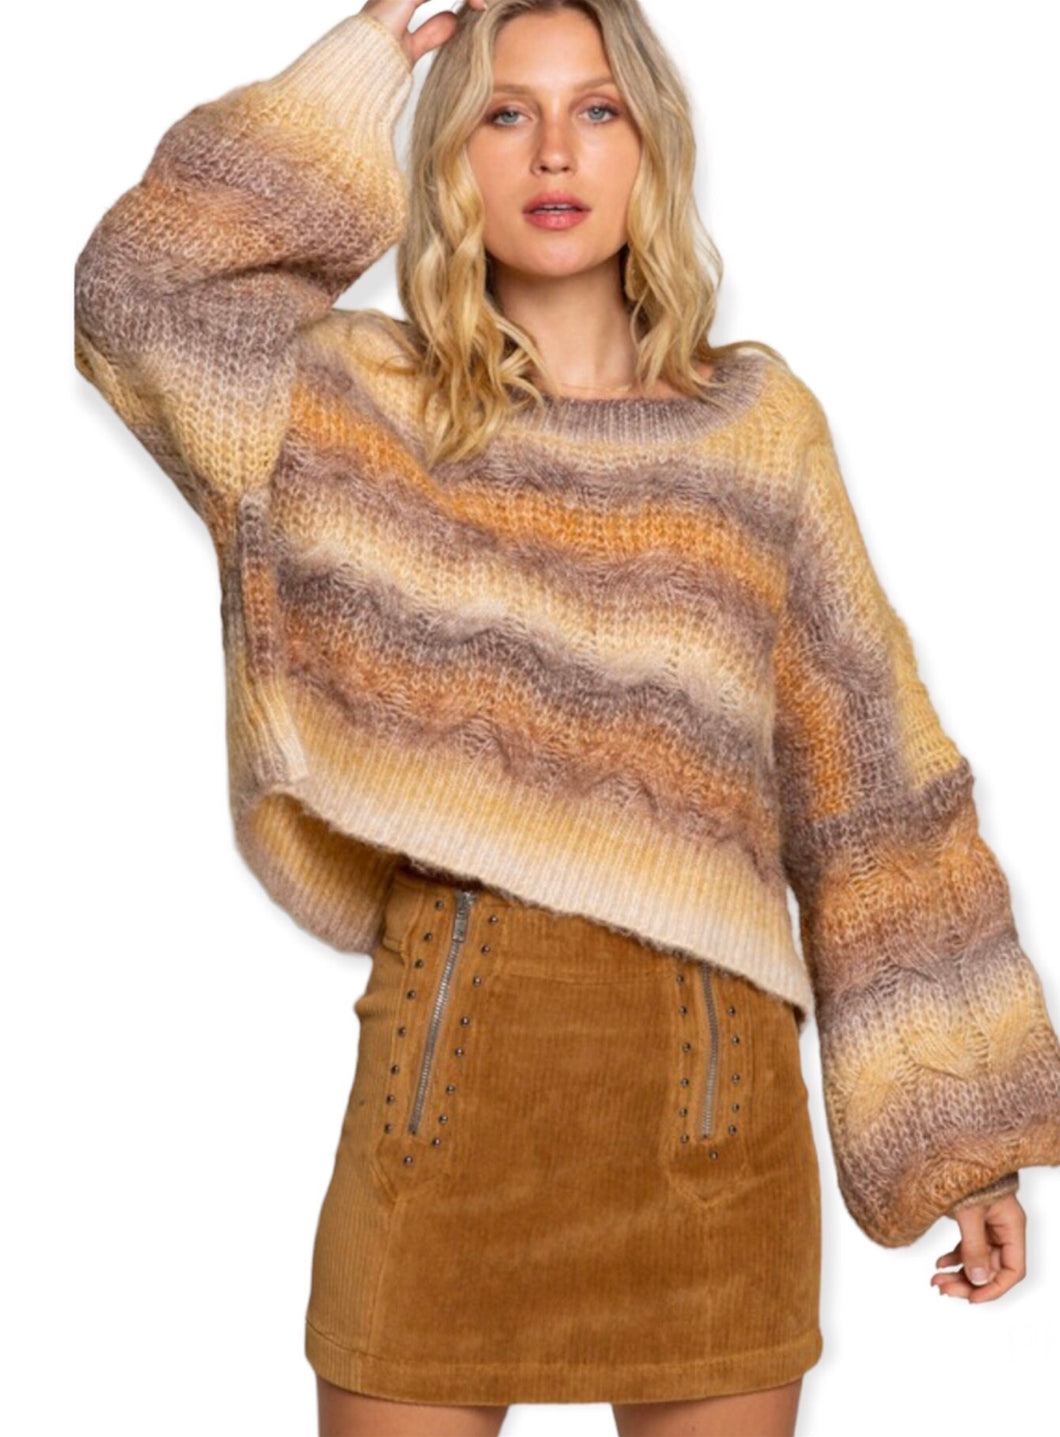 Roasted Spice Ribbed Sweater